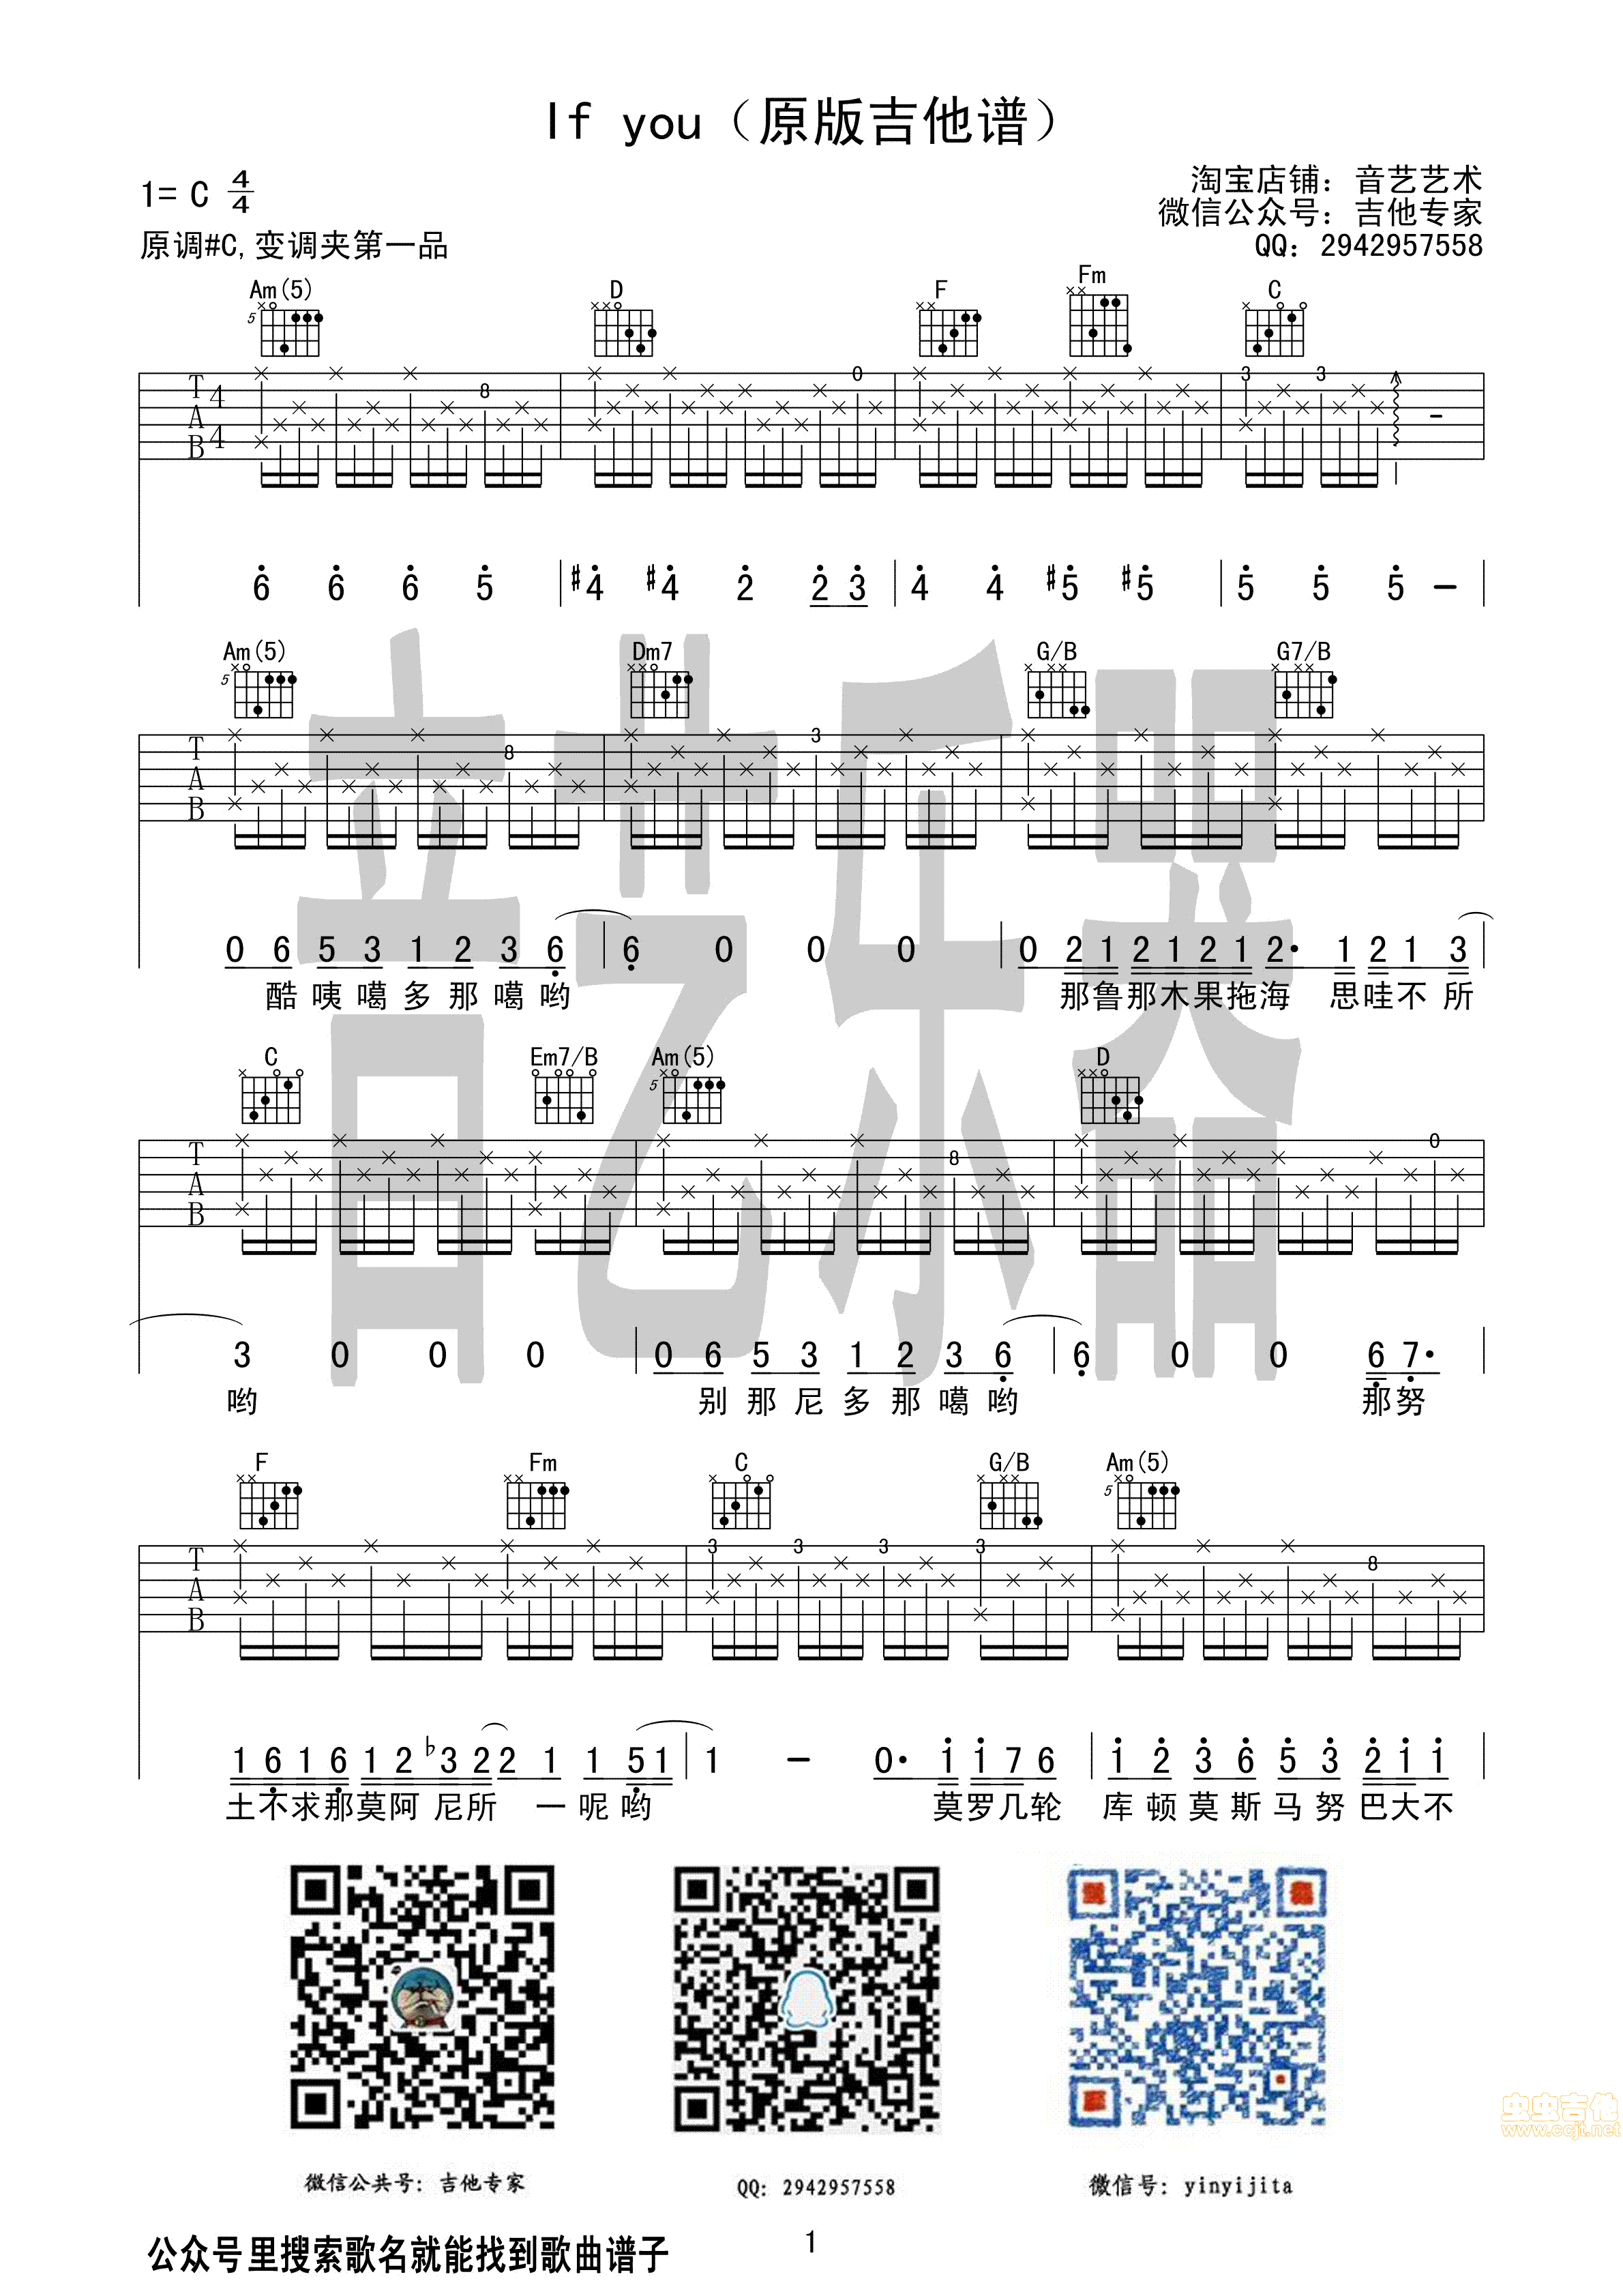 If You by Big Bang Guitar Tabs Chords Solo Notes Sheet Music Free